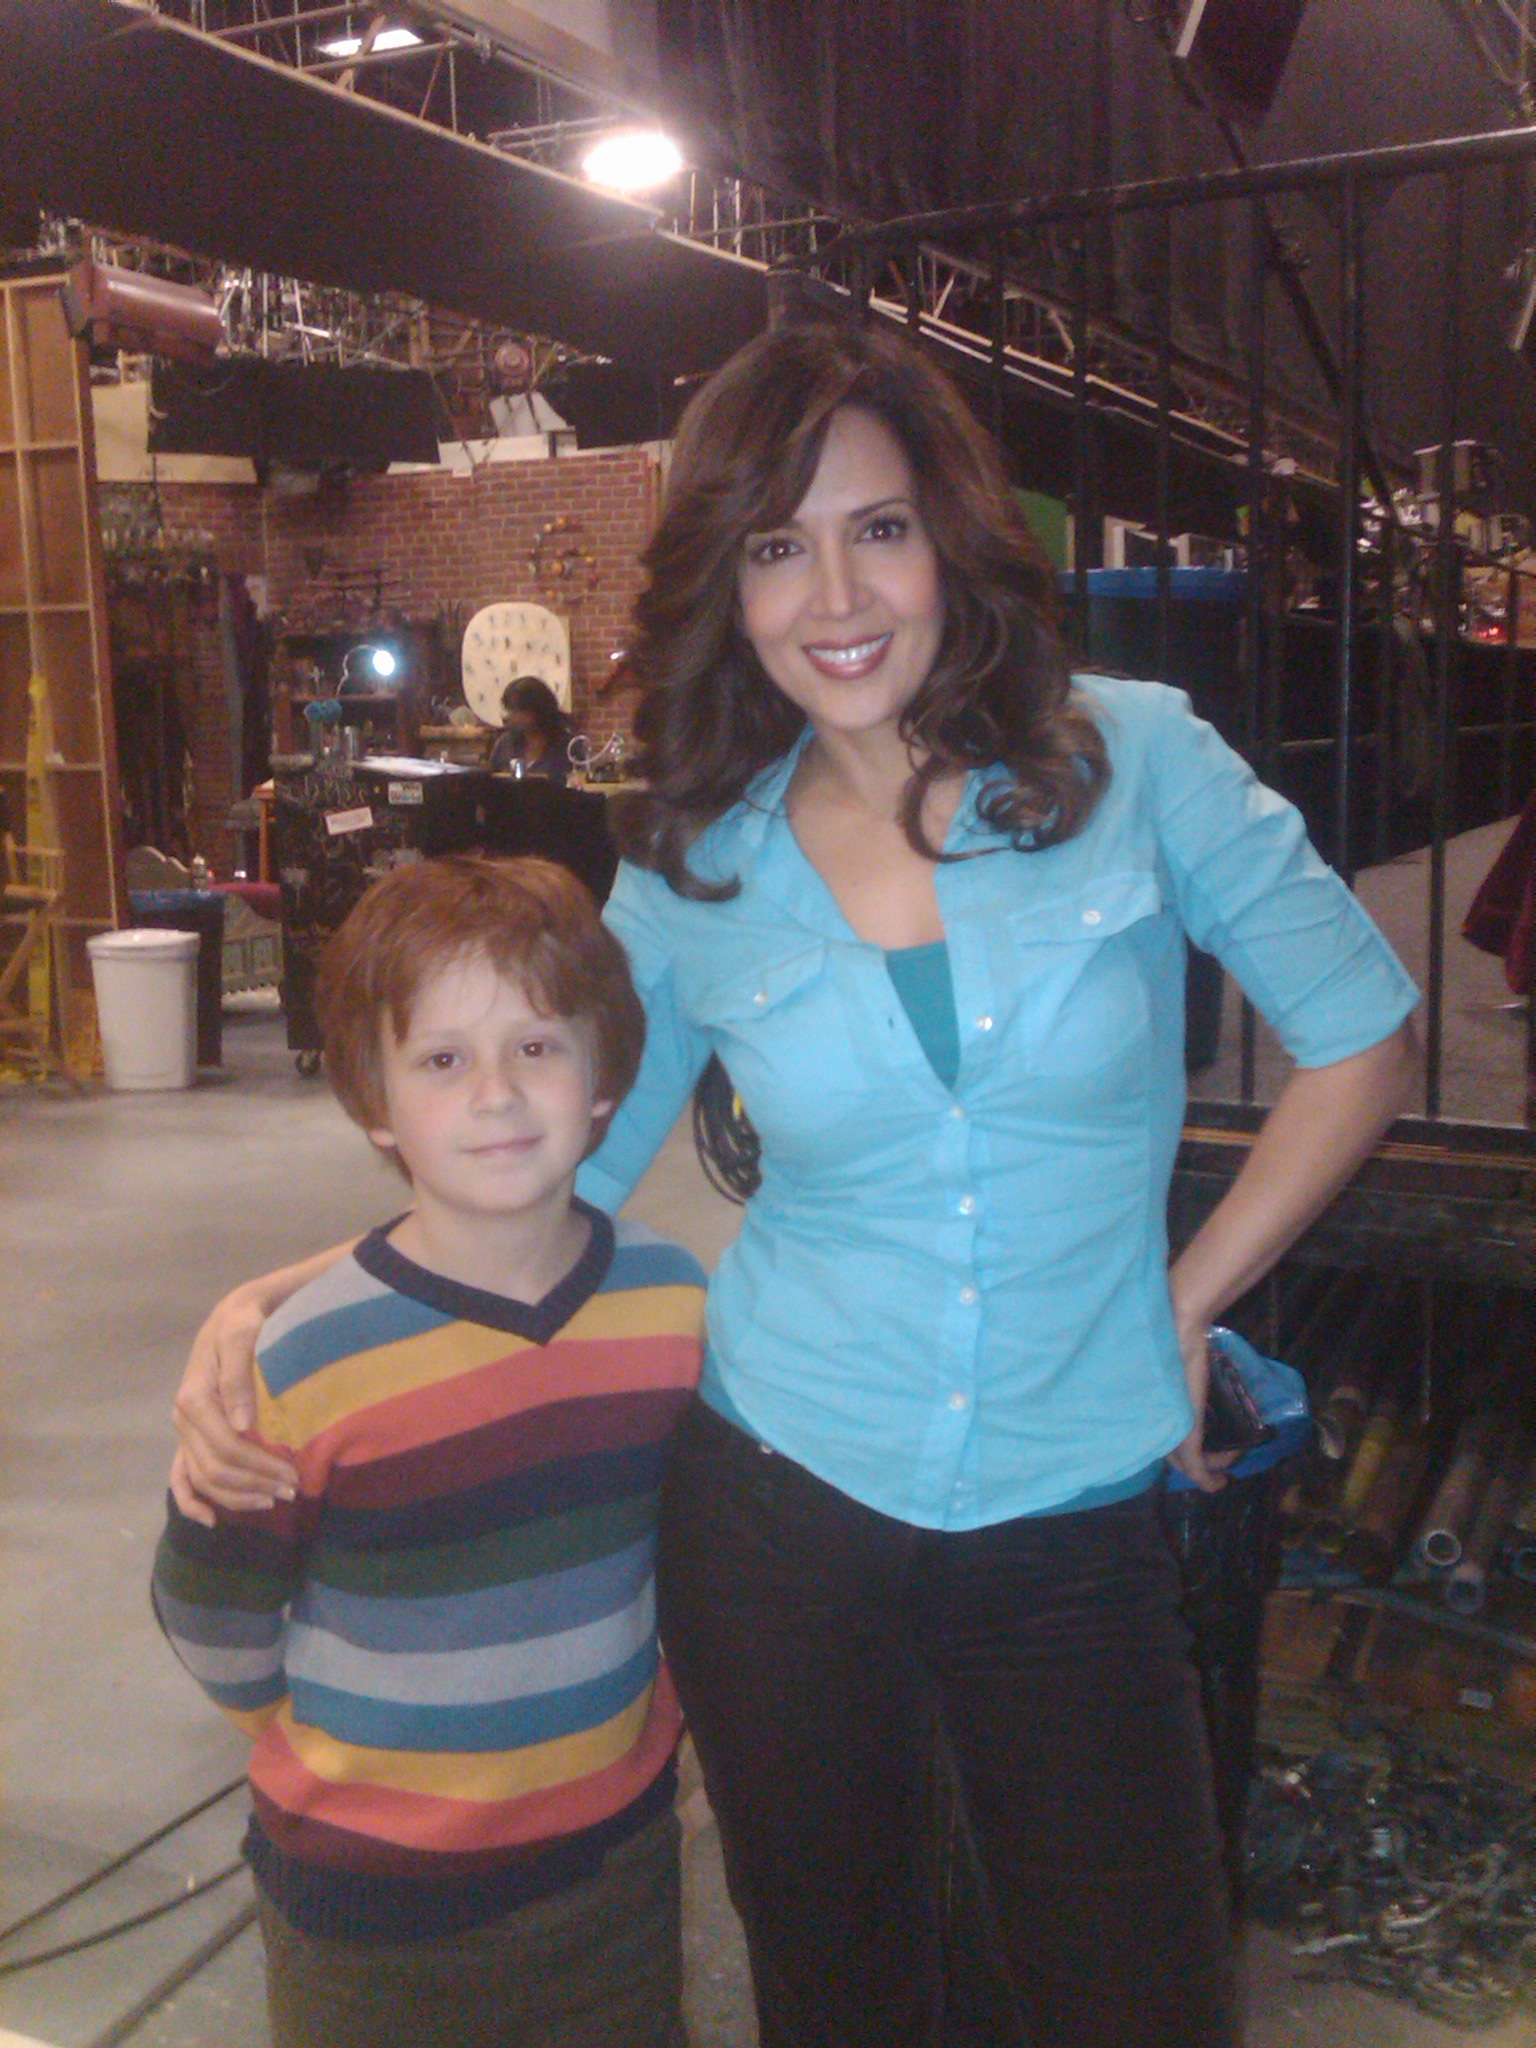 Skyler on the set of Wizards of Waverly Place with Maria Canals-Barrera